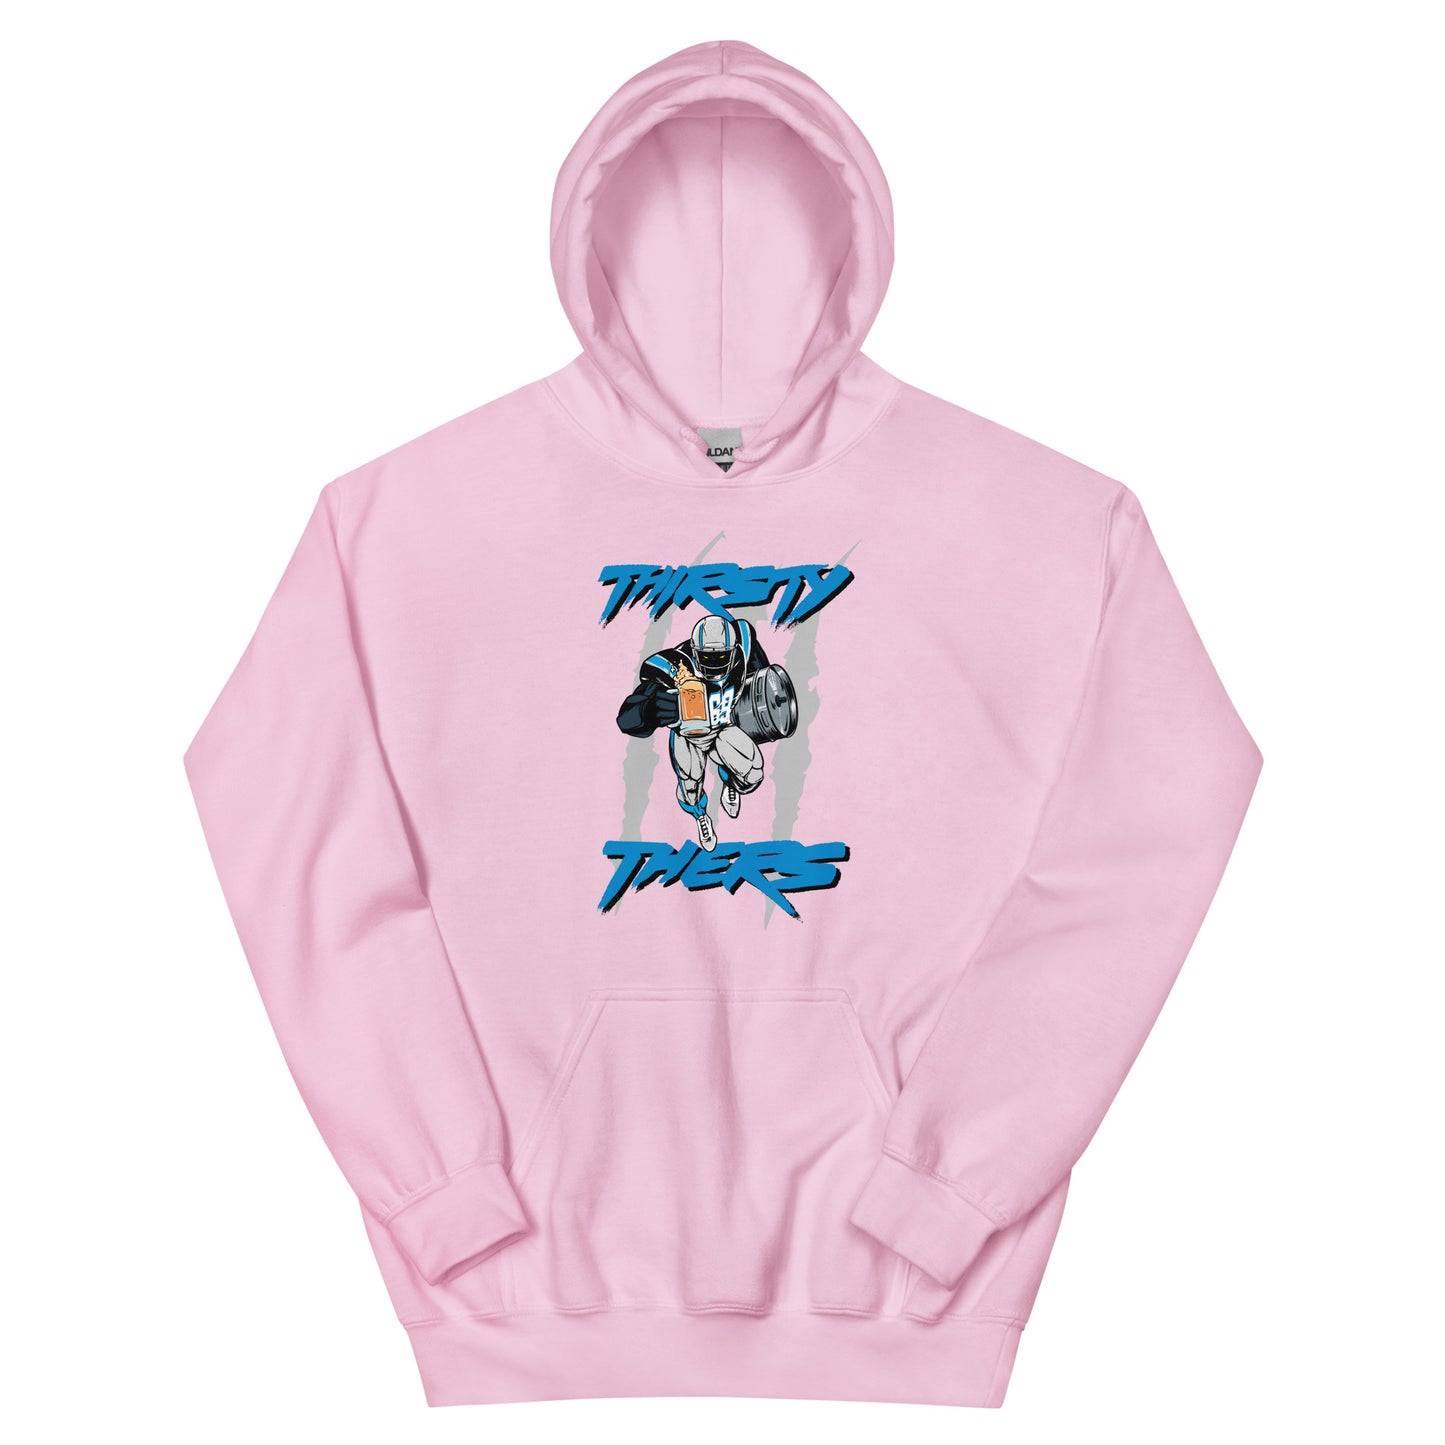 Thirsty Thers Hoodie